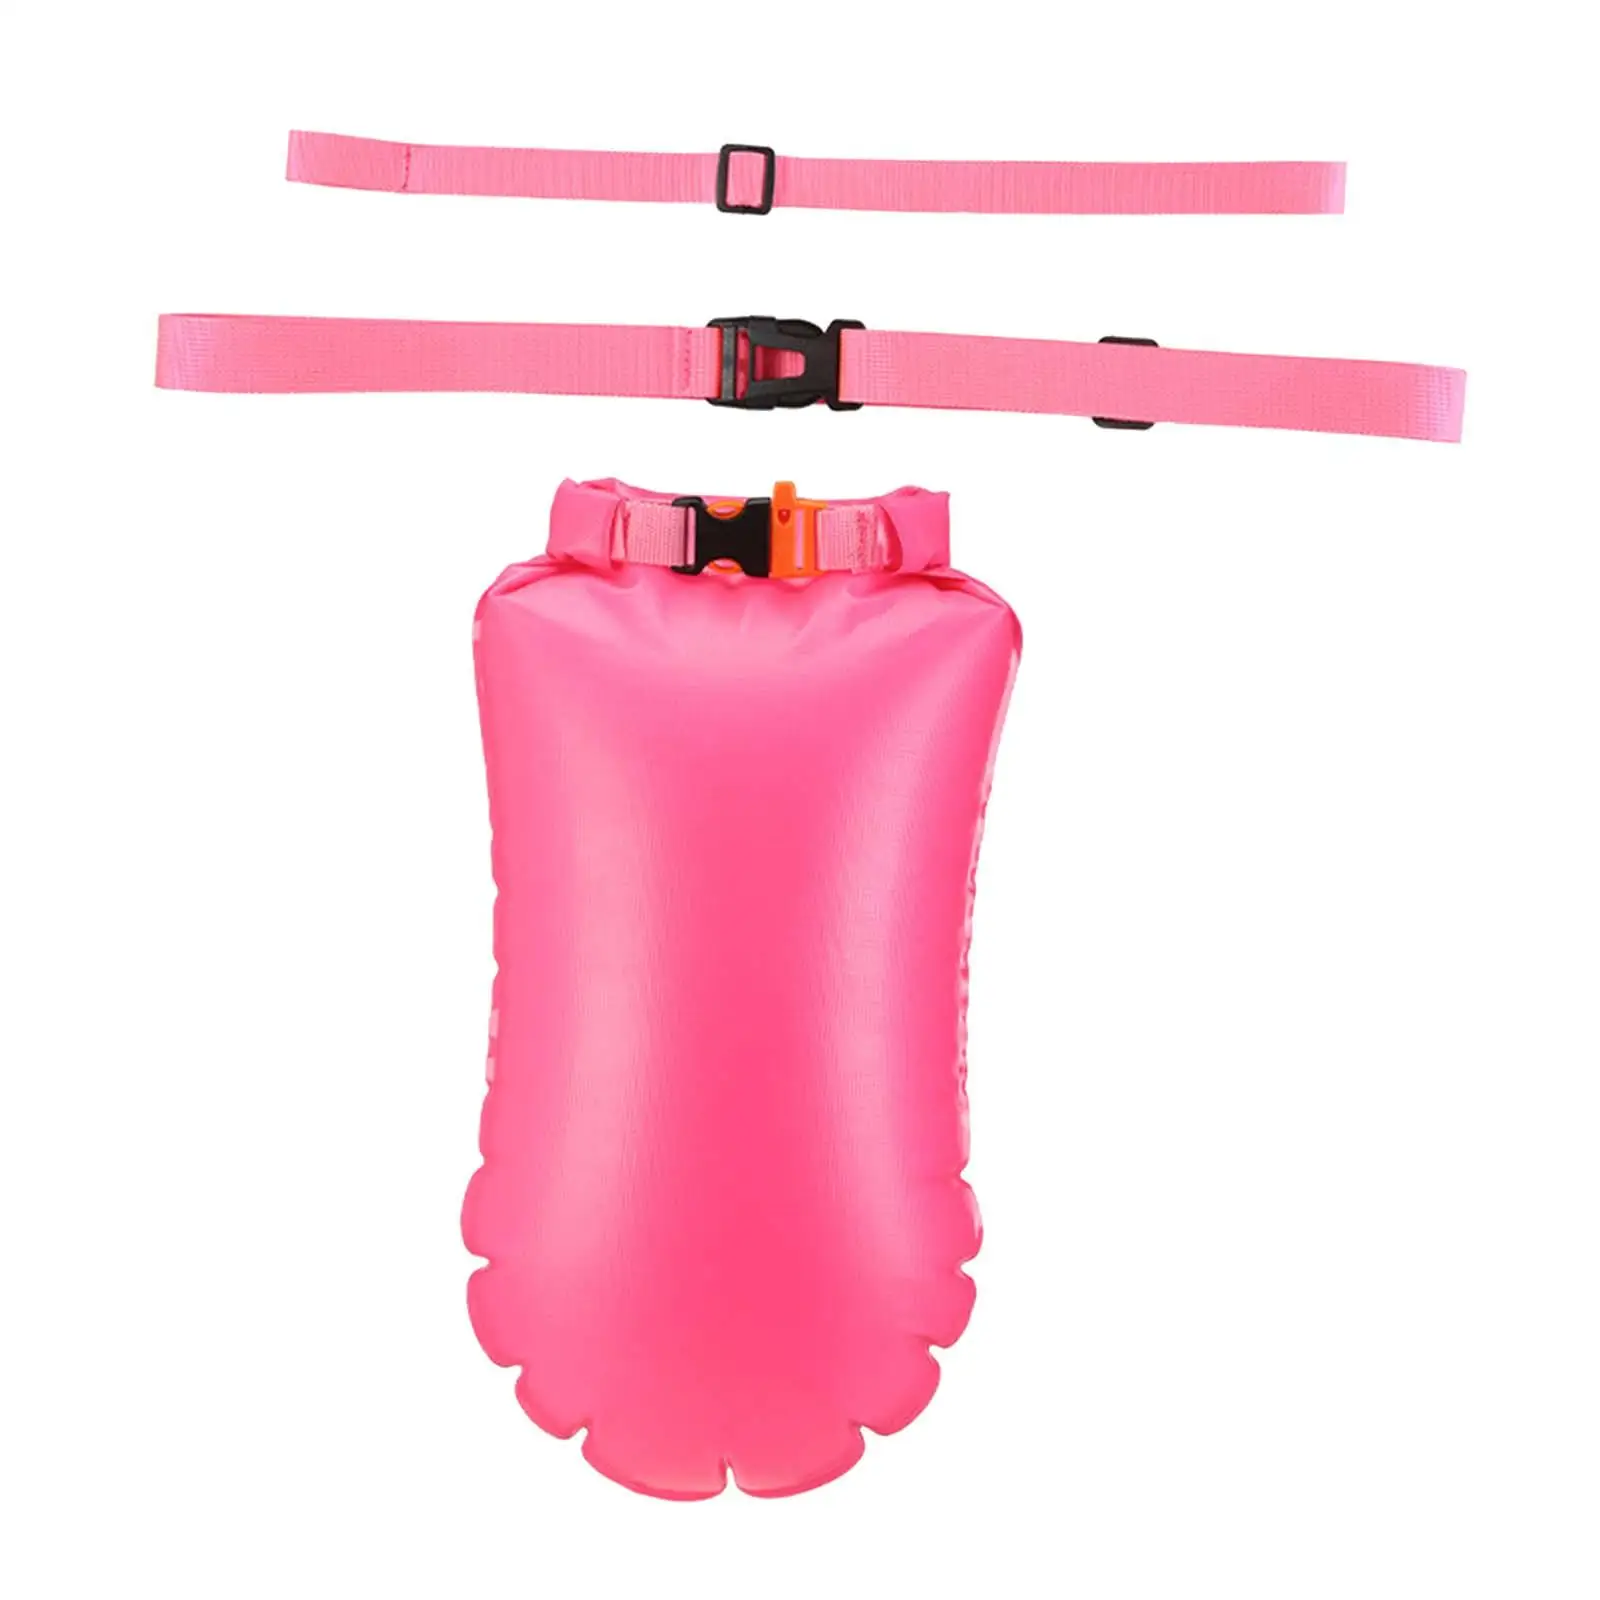 Safety Swim Buoy Waterproof Bag High Visible with Adjustable Belt Swimming Tow Bag for Boating Surfing Kayak Swimming Pool Lake